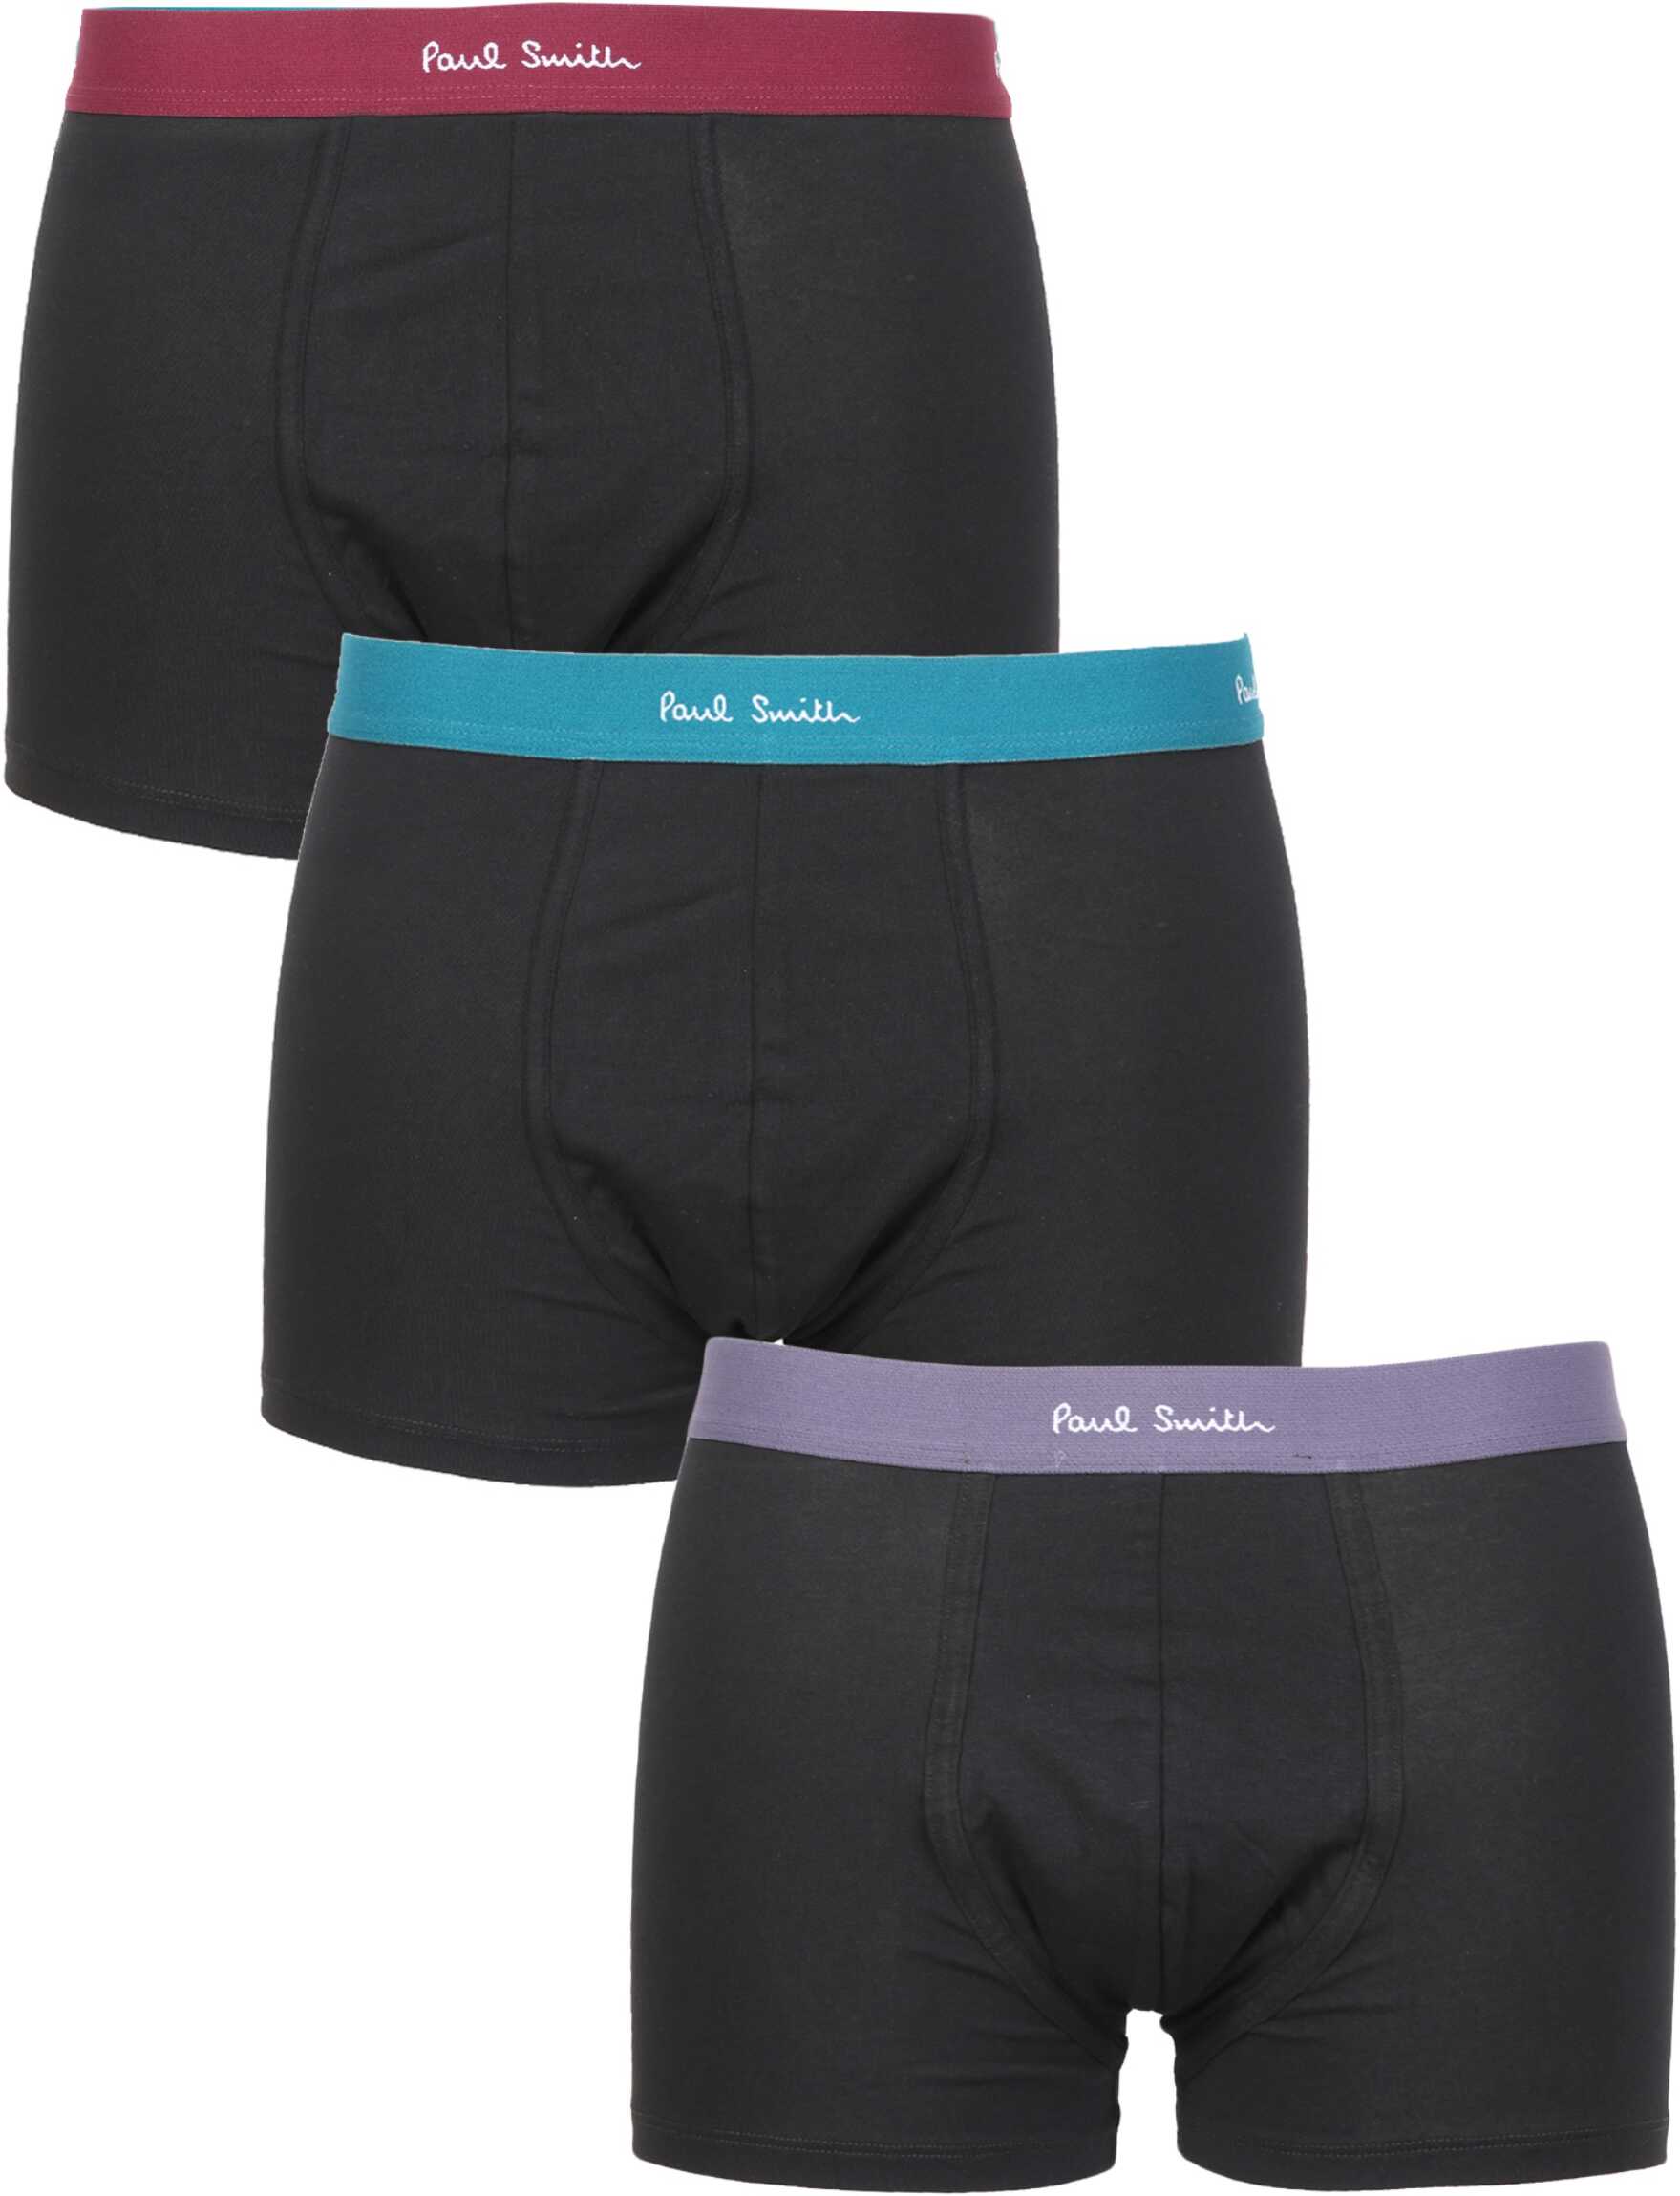 Paul Smith Pack Of Three Boxers M1A/914C/A3PCKQ_79 BLACK